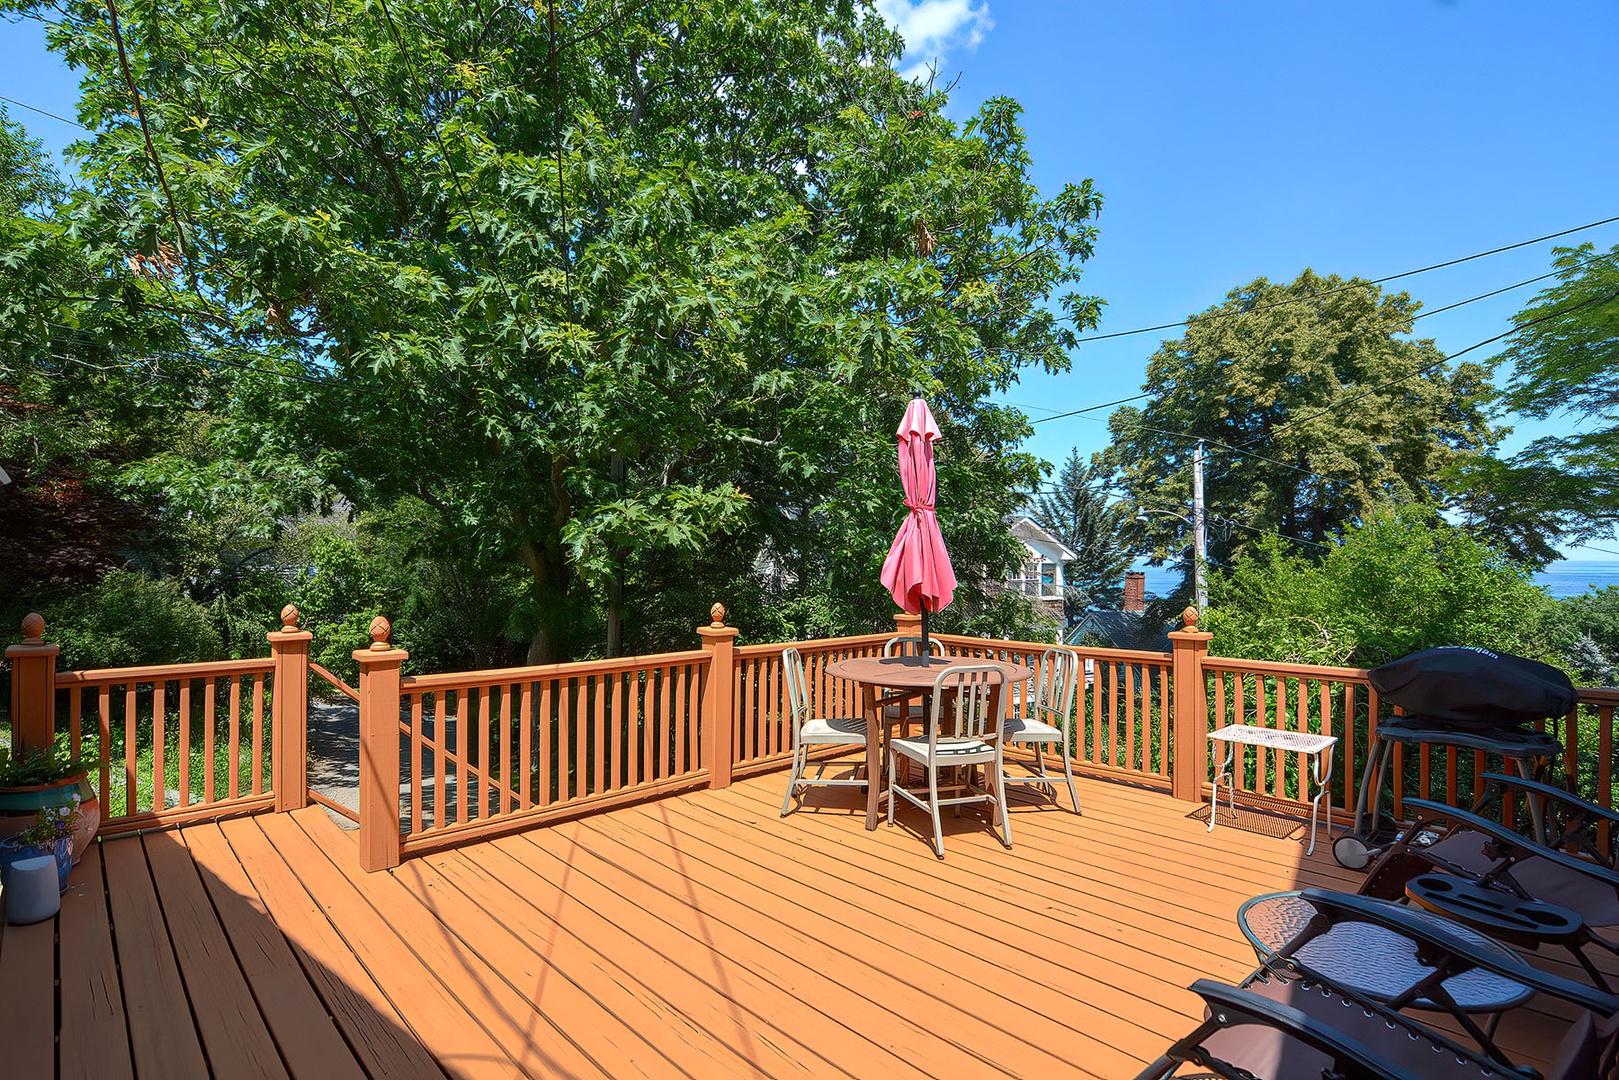 Relax on the deck and catch the ocean breezes.